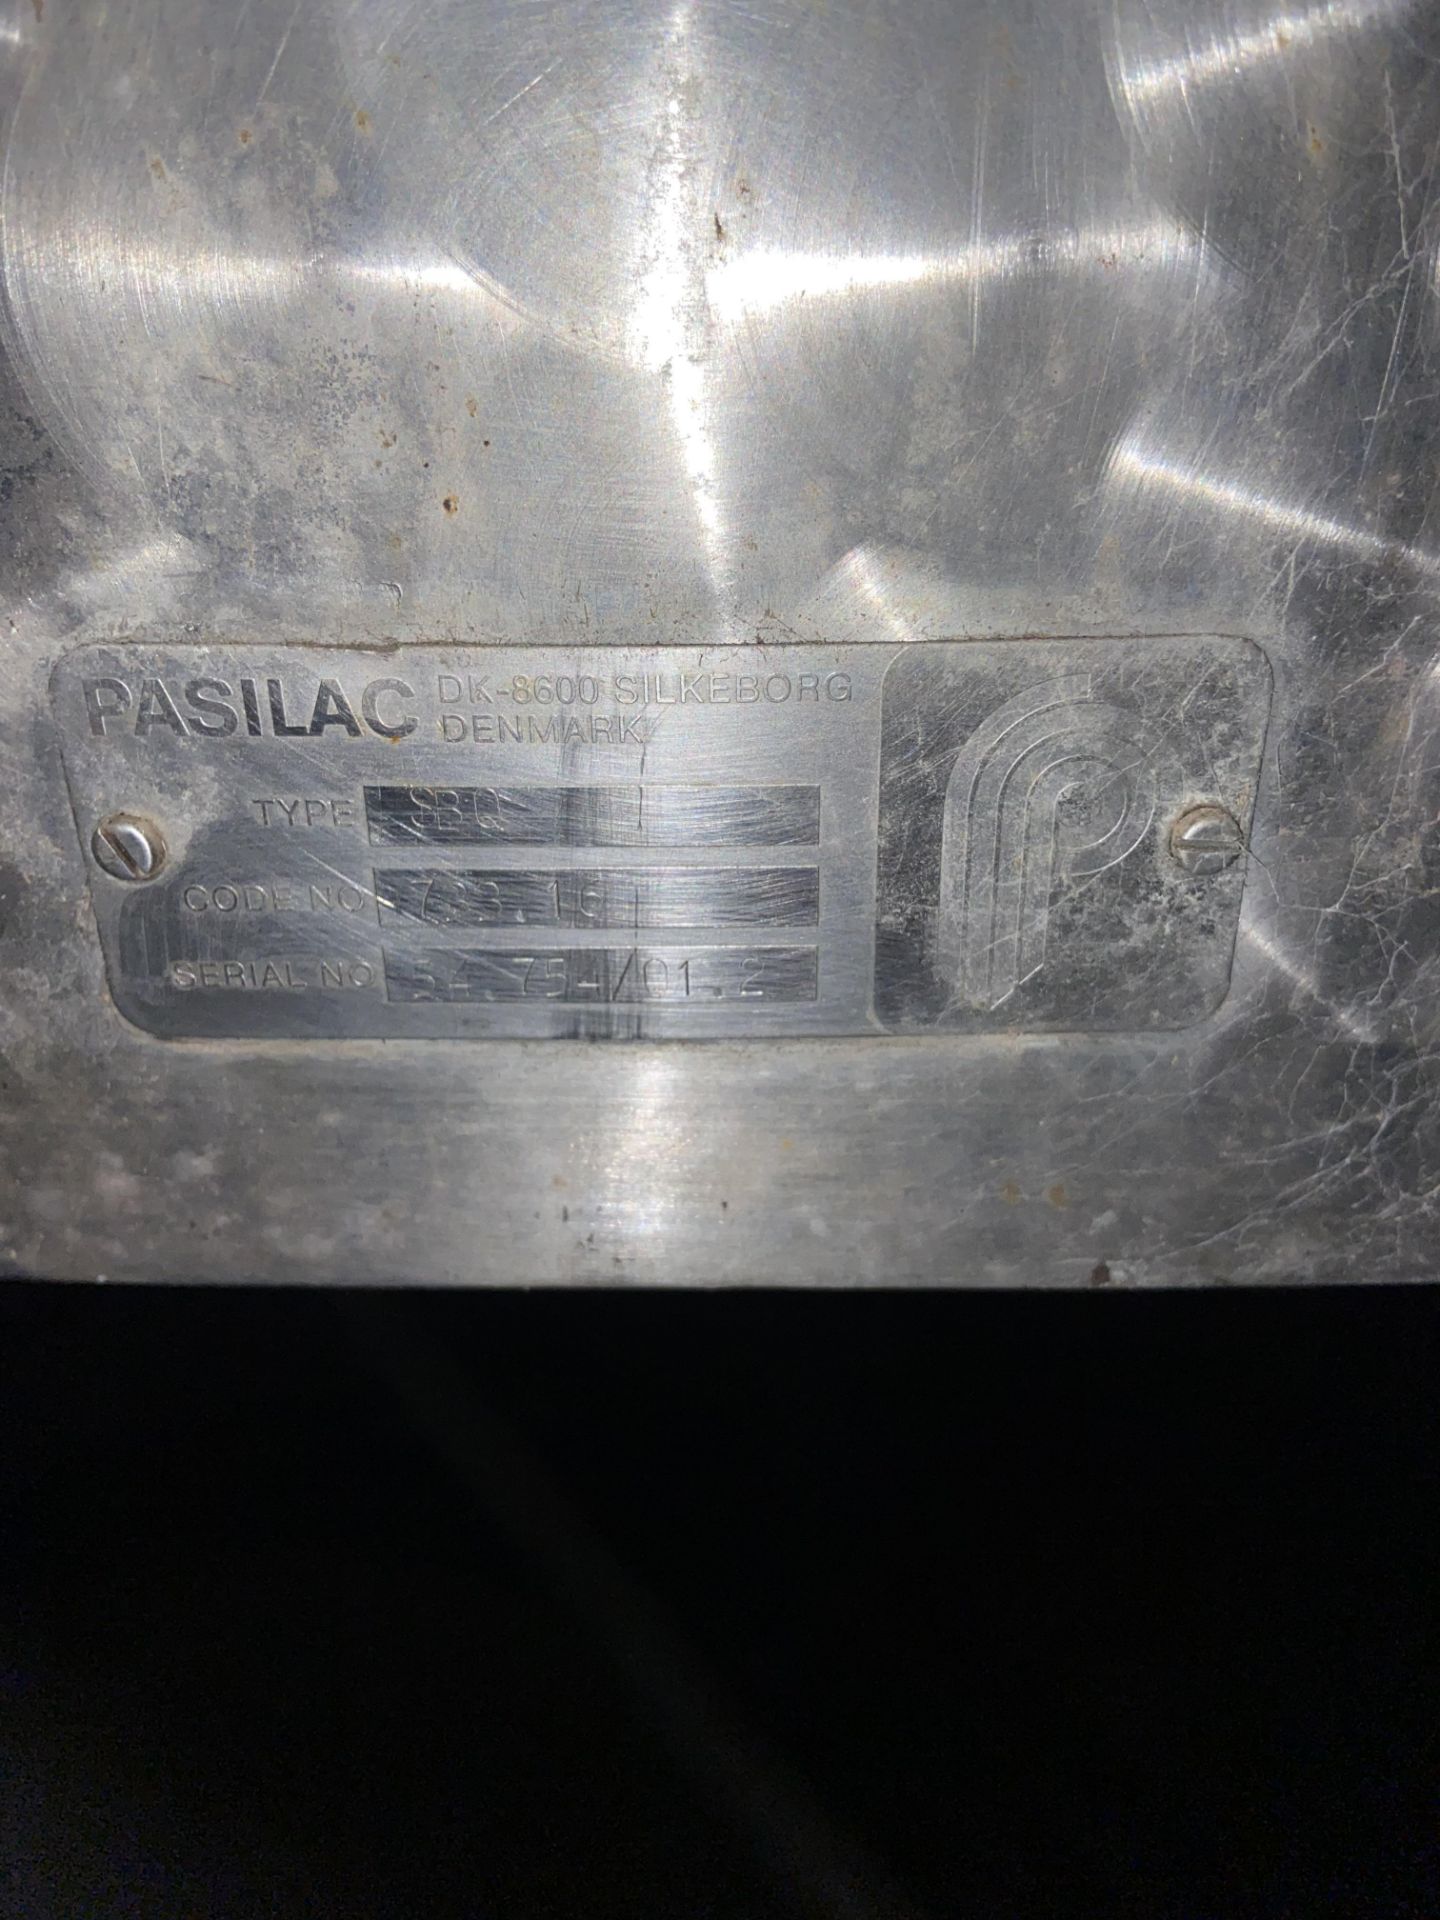 Pasilac SBQ VERTICAL STAINLESS STEEL MIXING VESSEL, code no. 733.16, serial no. 54.754/01.2, approx. - Image 4 of 4